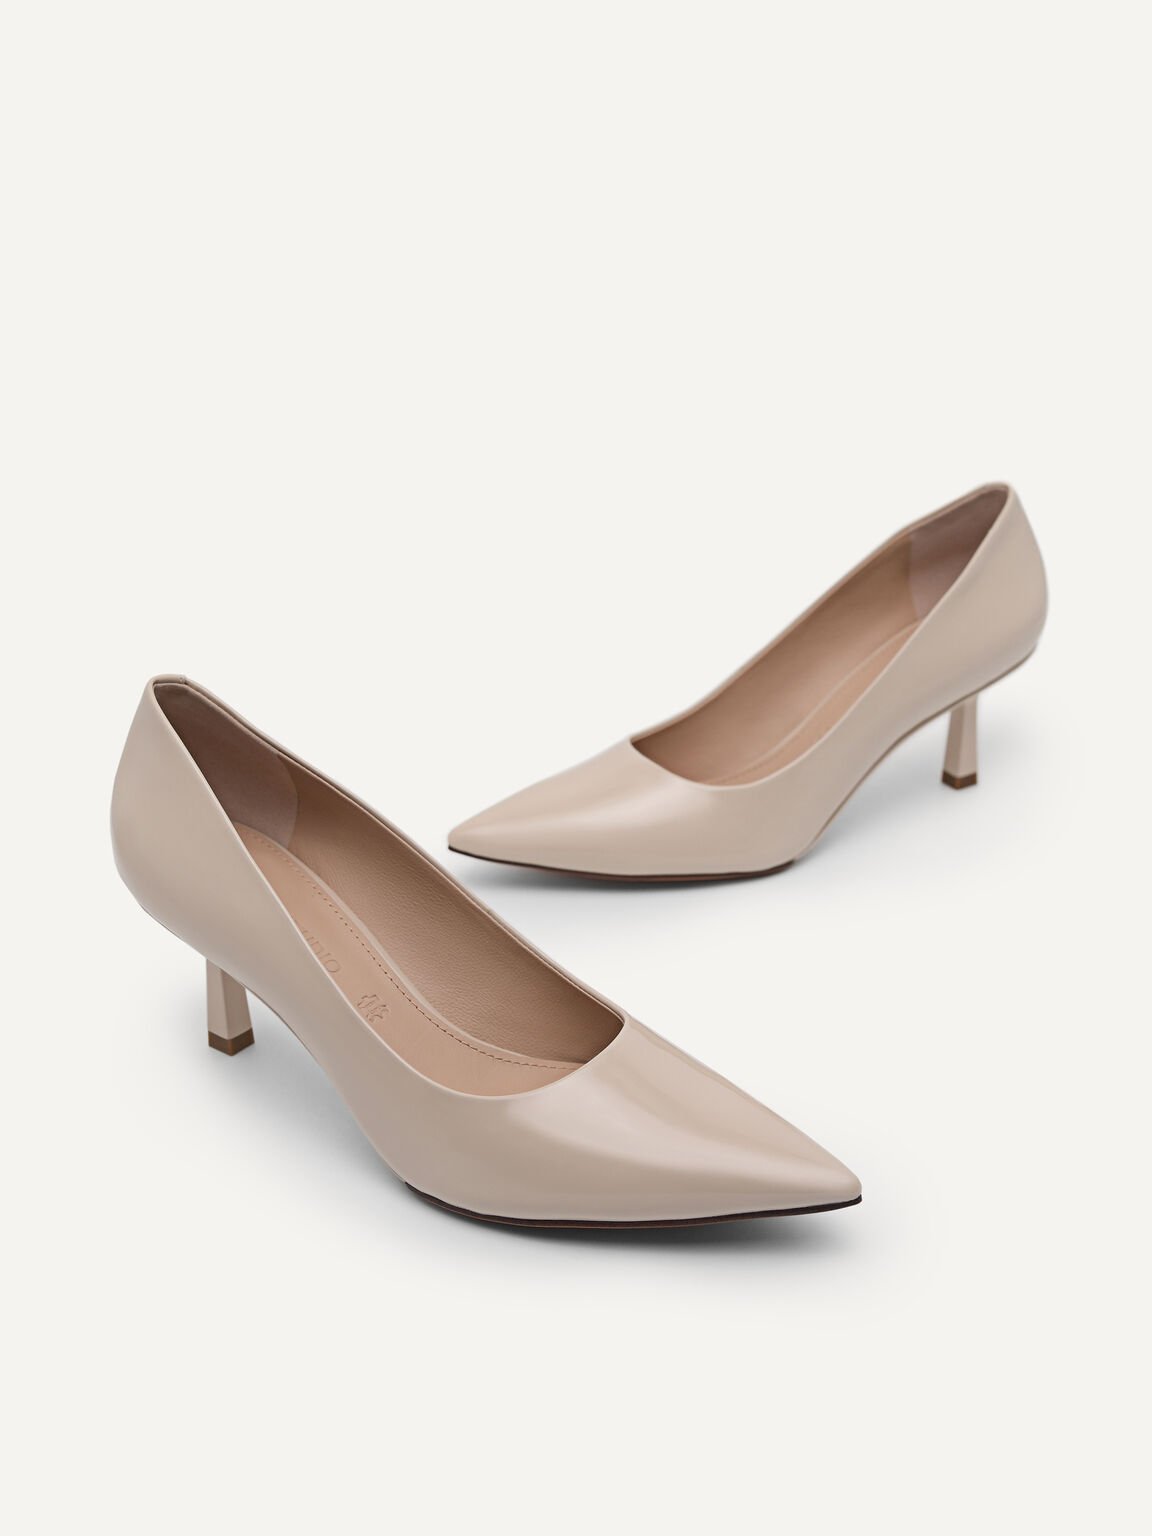 Patent Leather Pointed Pumps, Nude, hi-res